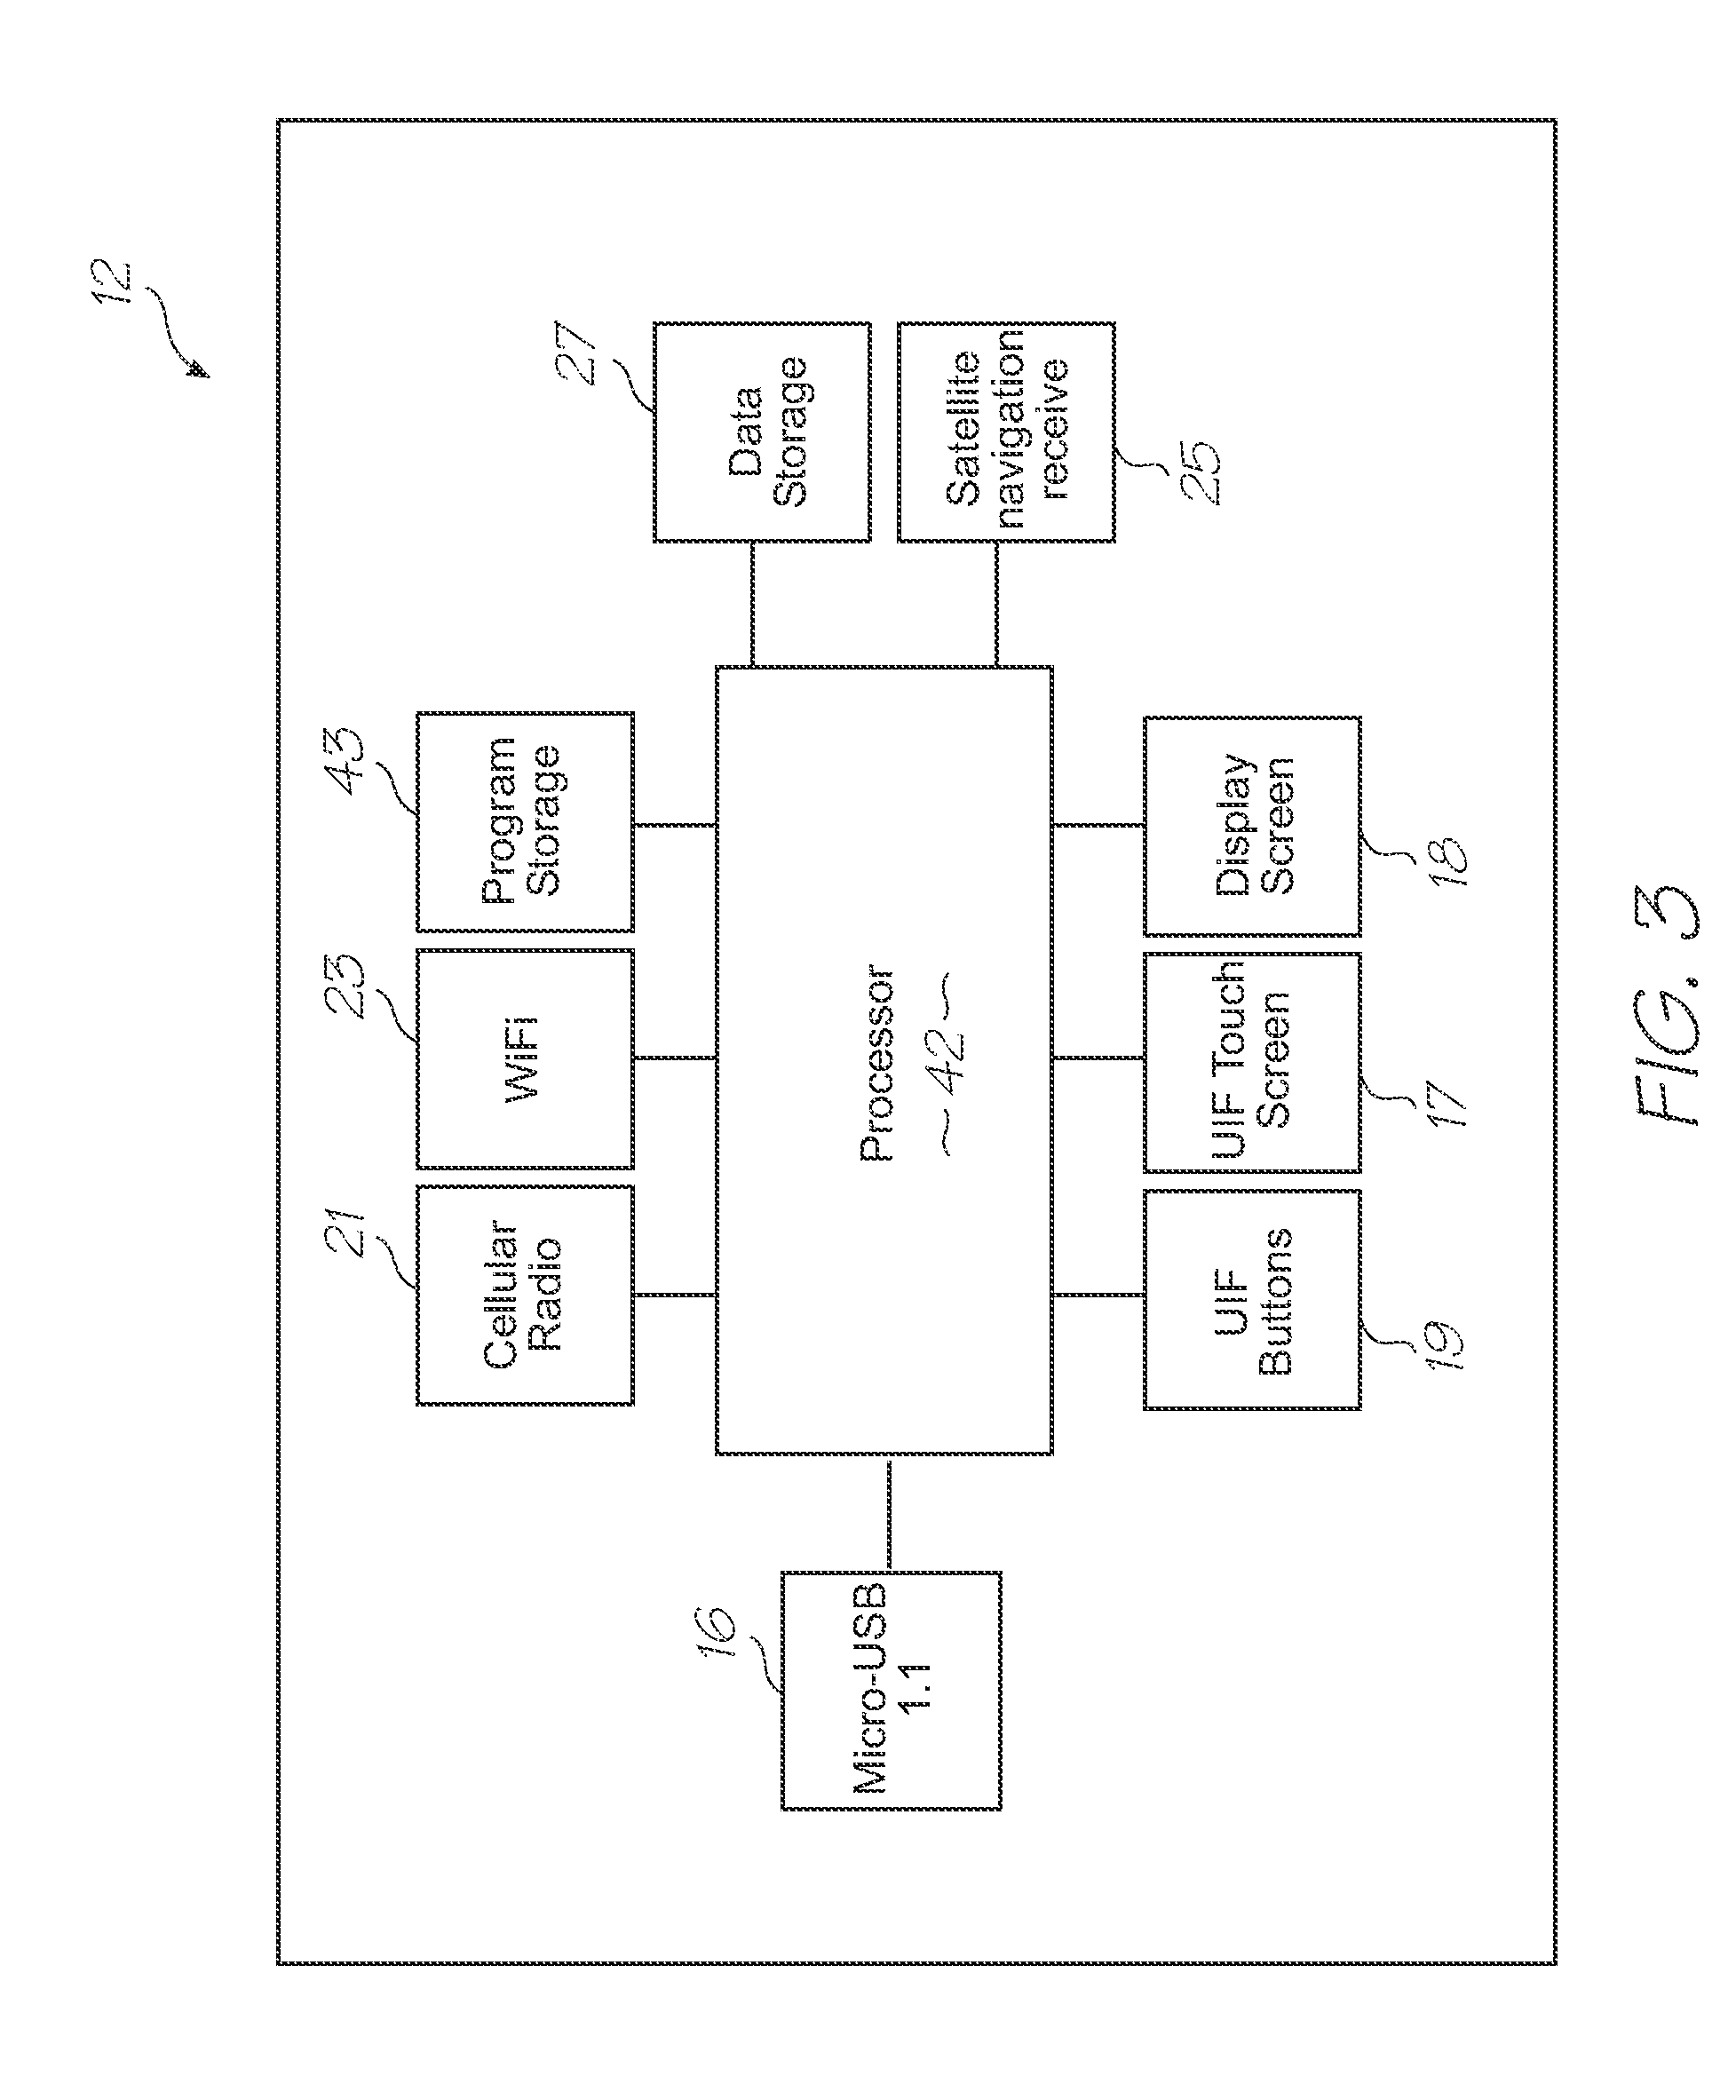 Microfluidic device for chemically and thermally lysing cells